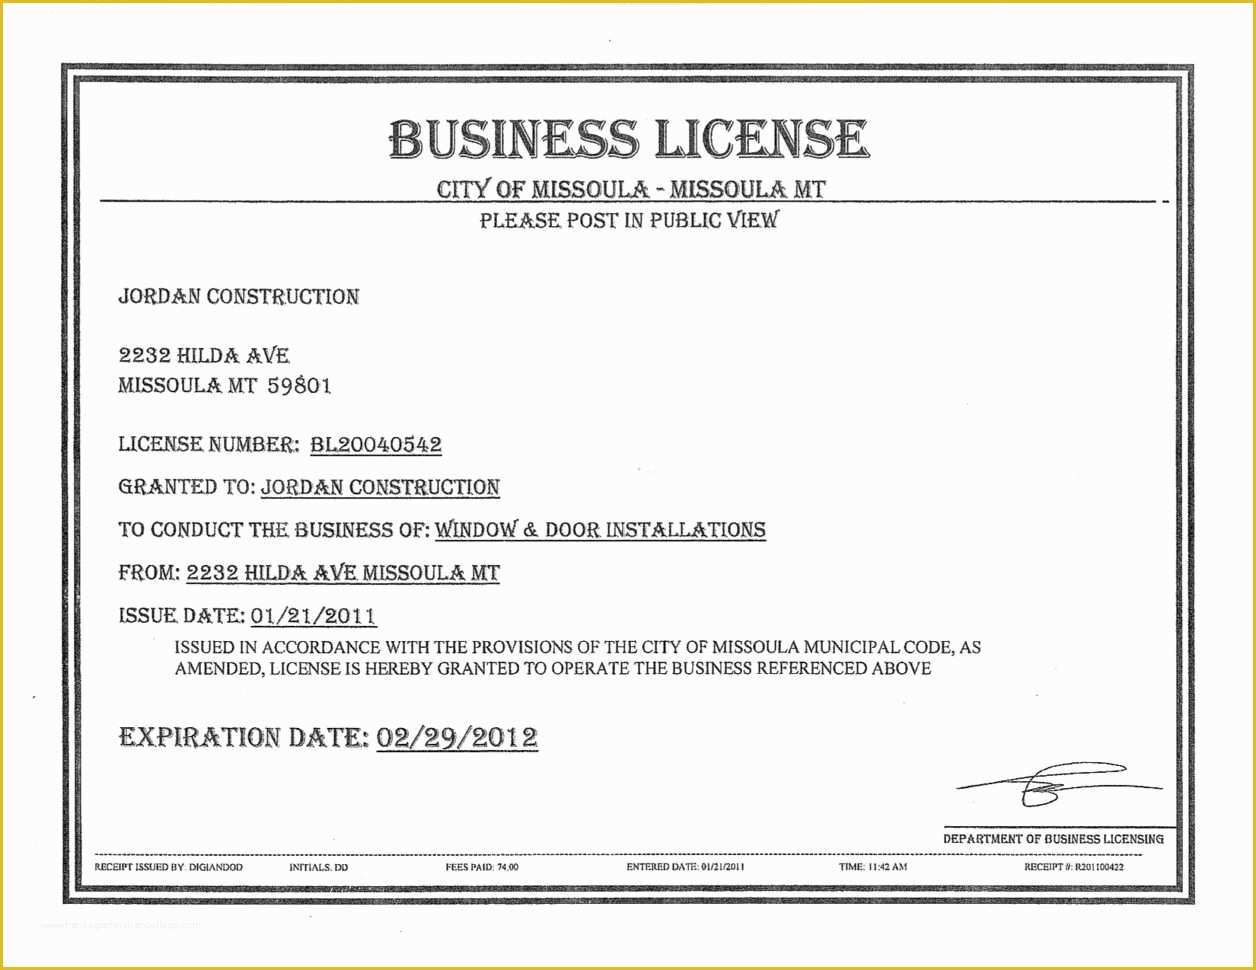 Free Business License Template Of Business License Samples Spreadsheet Templates for Busines